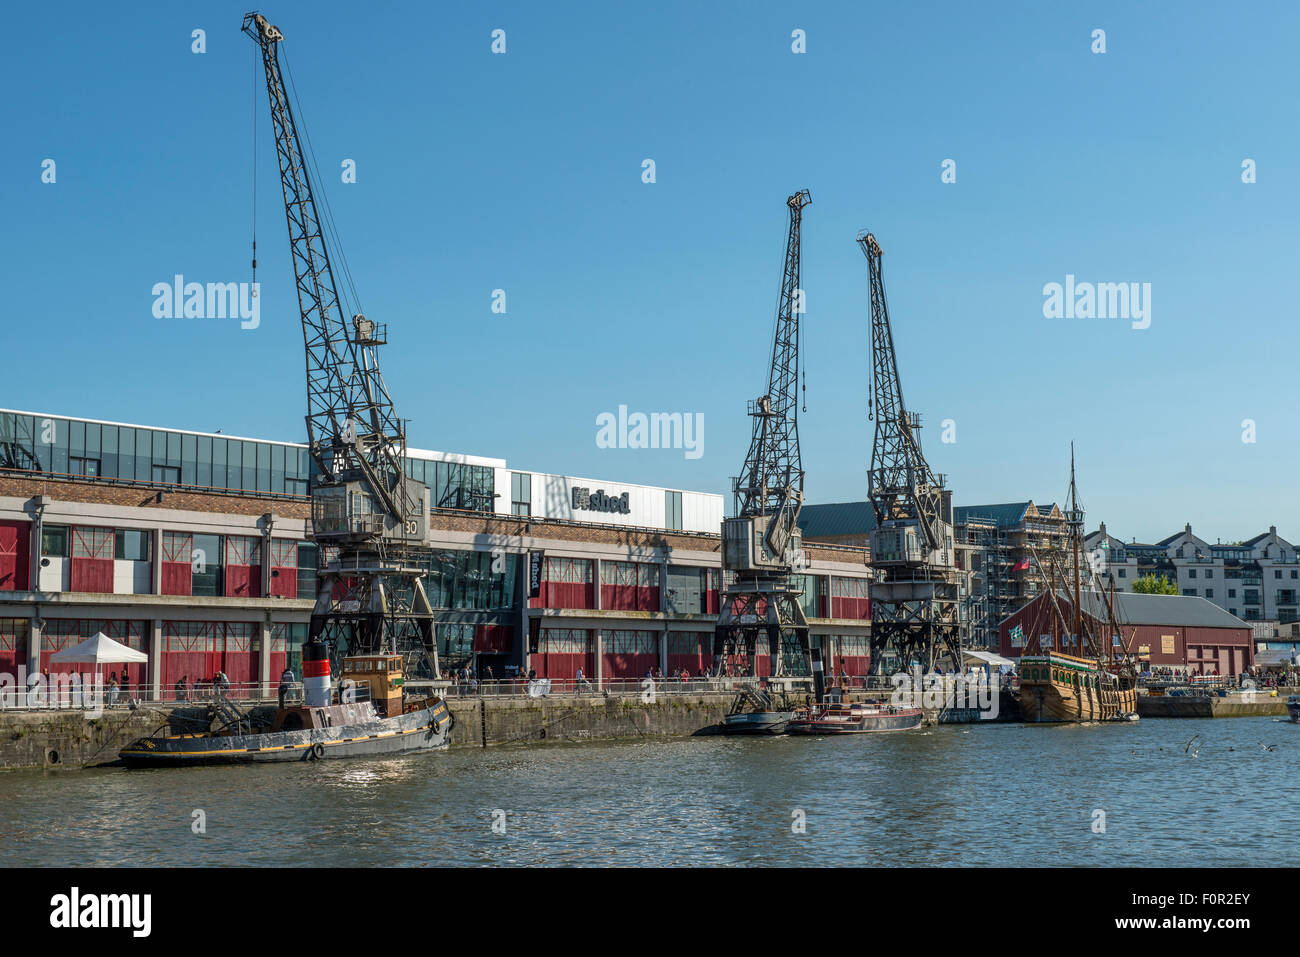 Bristol Harbour Area during Harbour Festival showing the M Shed and Cranes Stock Photo